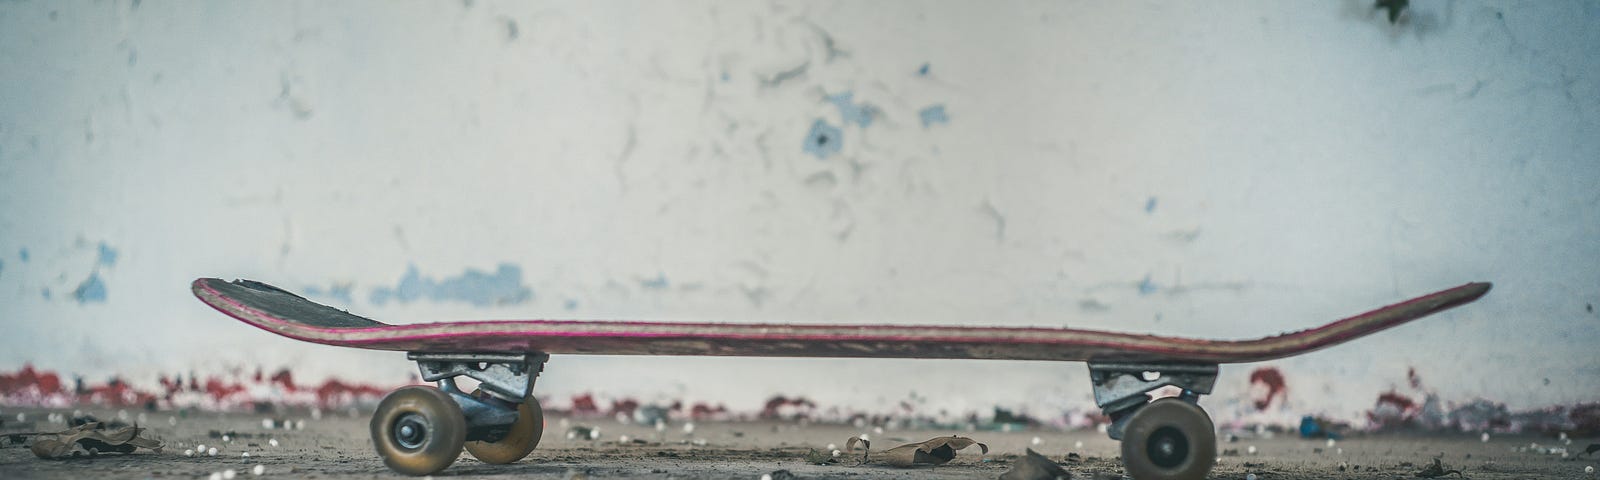 An old-school skateboard sits on the dirt-covered pavement, with a white wall with paint peeling in the background.